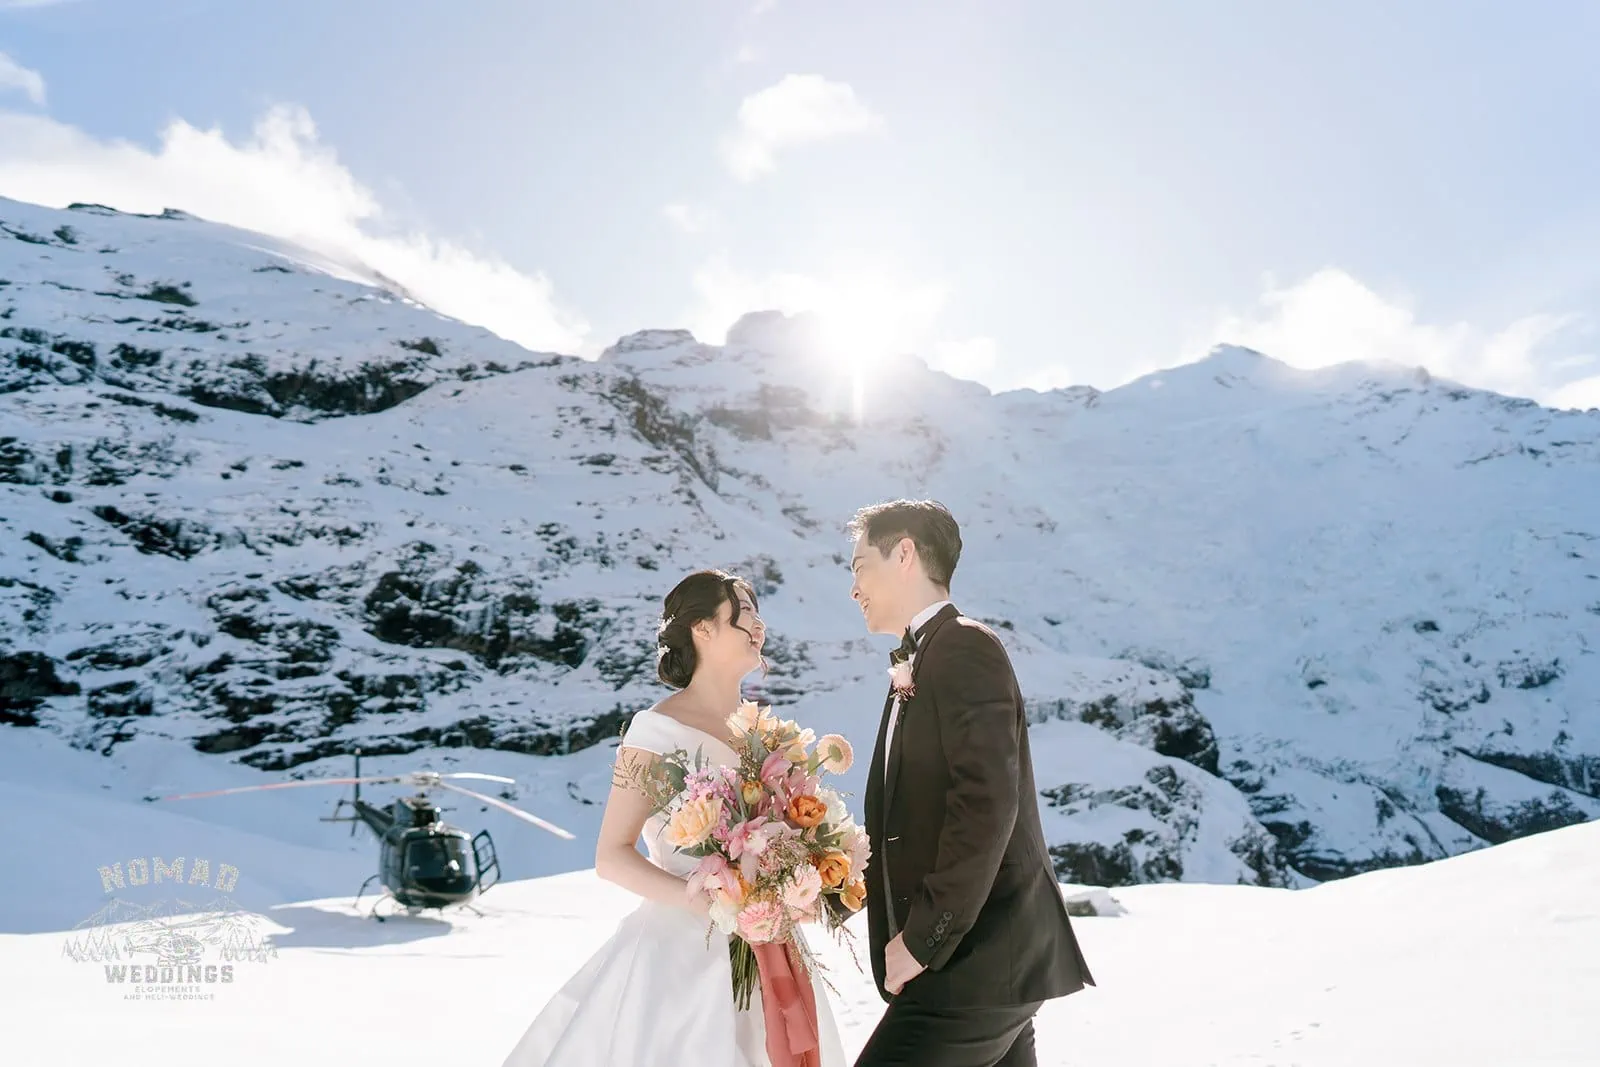 Queenstown New Zealand Elopement Wedding Photographer - Bo and Junyi's heli pre wedding shoot captures them standing in front of a majestic snow-covered mountain, after making four exhilarating landings.